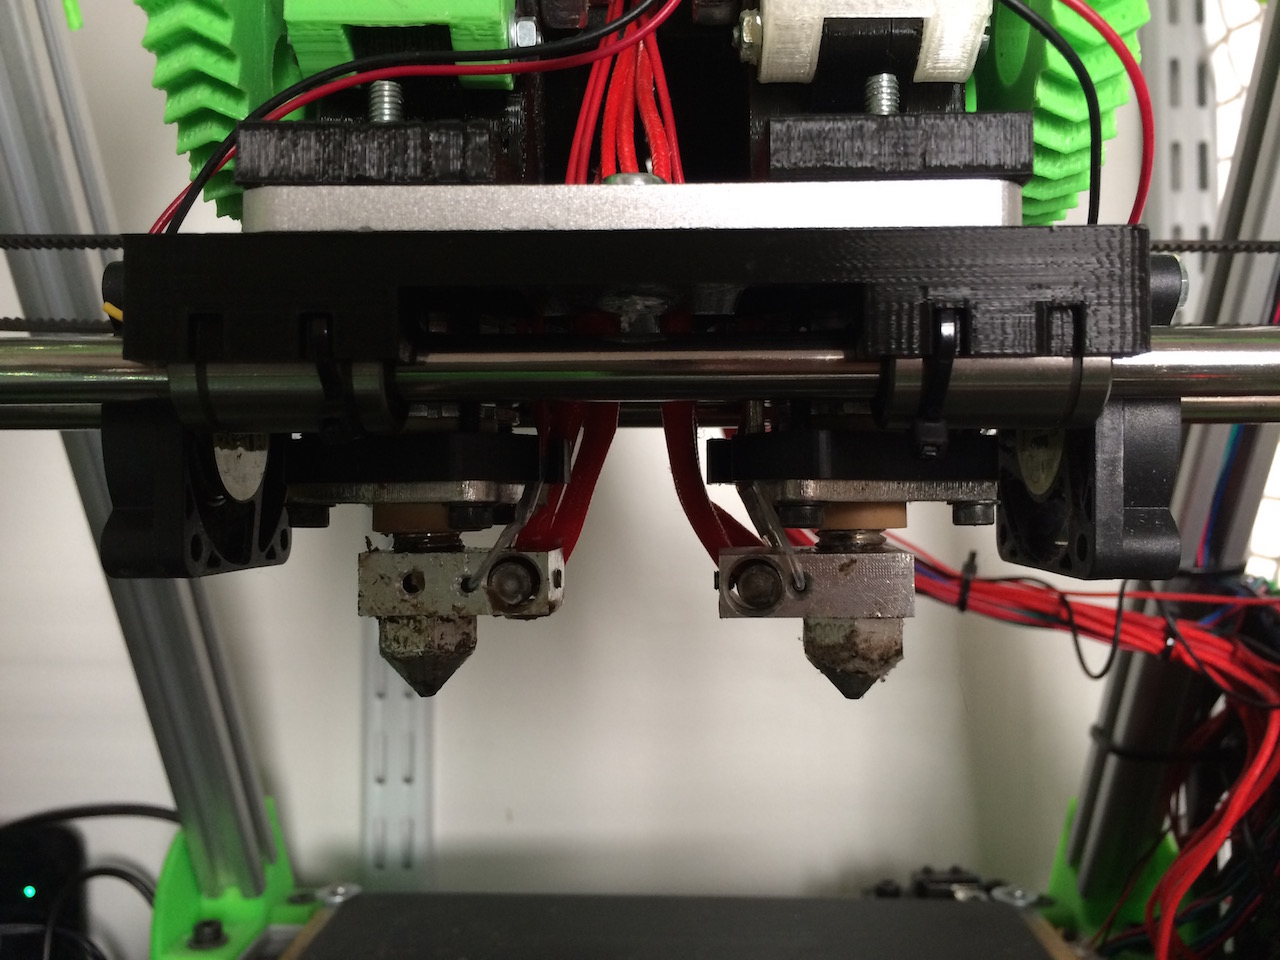 Extruders on carriage